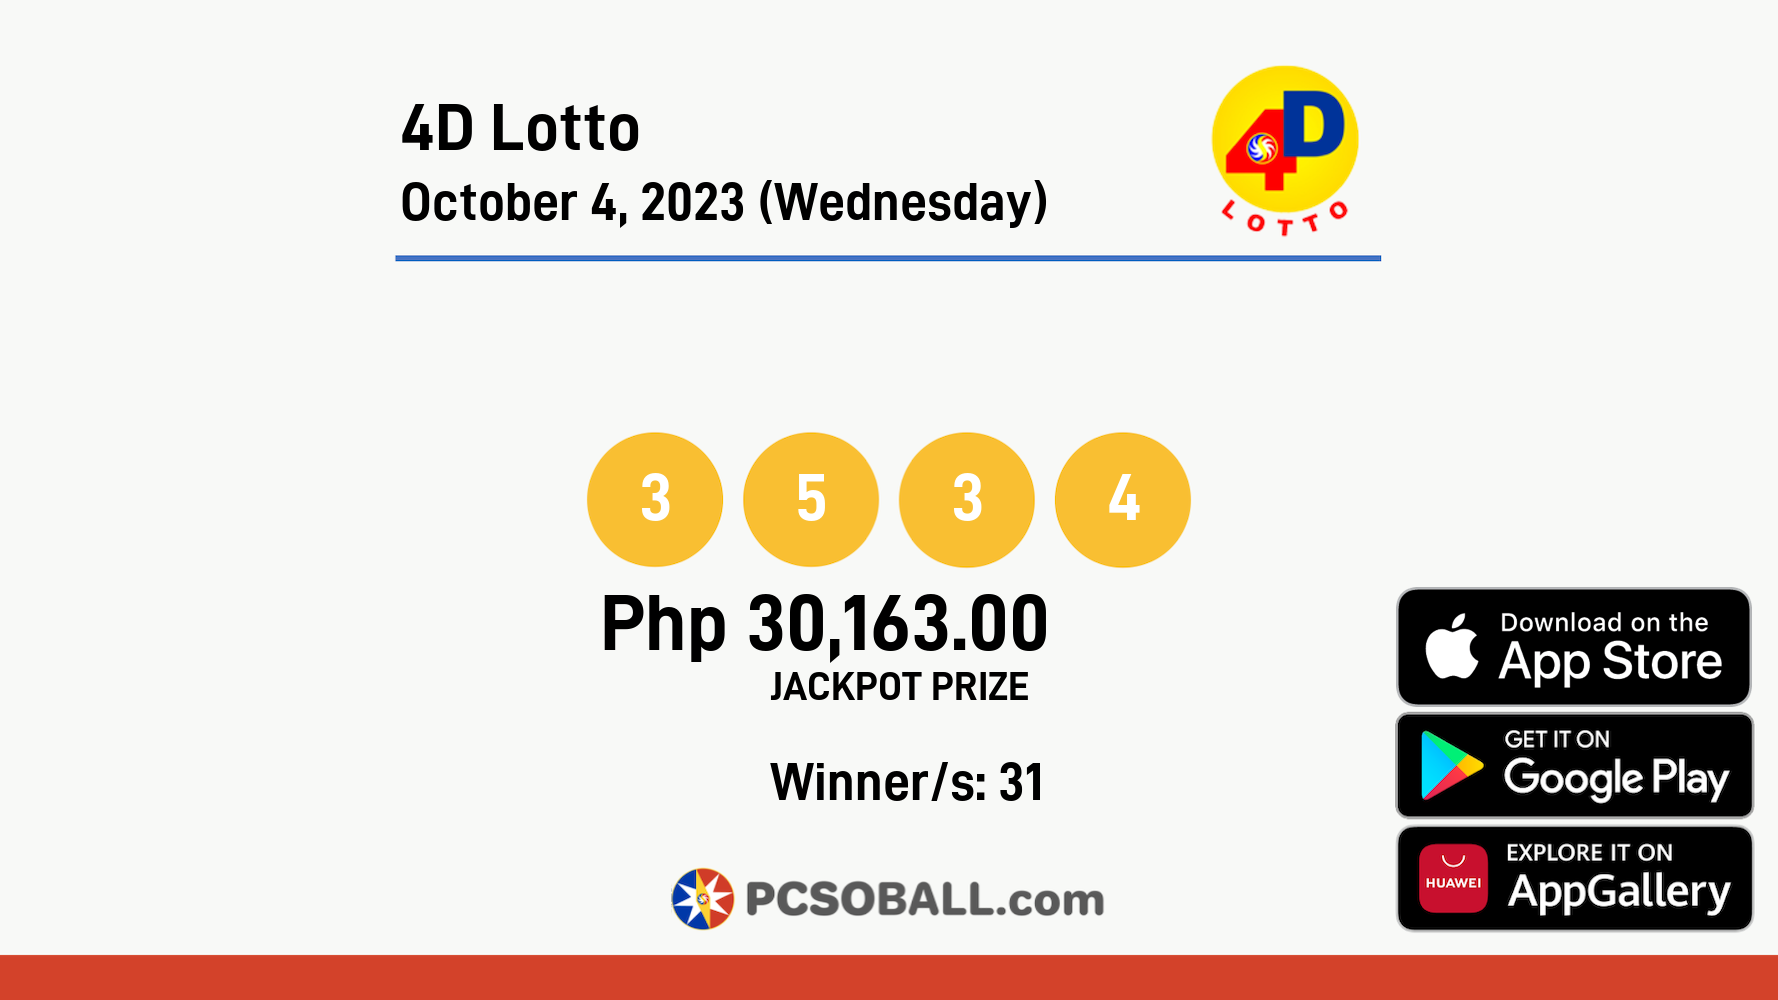 4D Lotto October 4, 2023 (Wednesday) Result